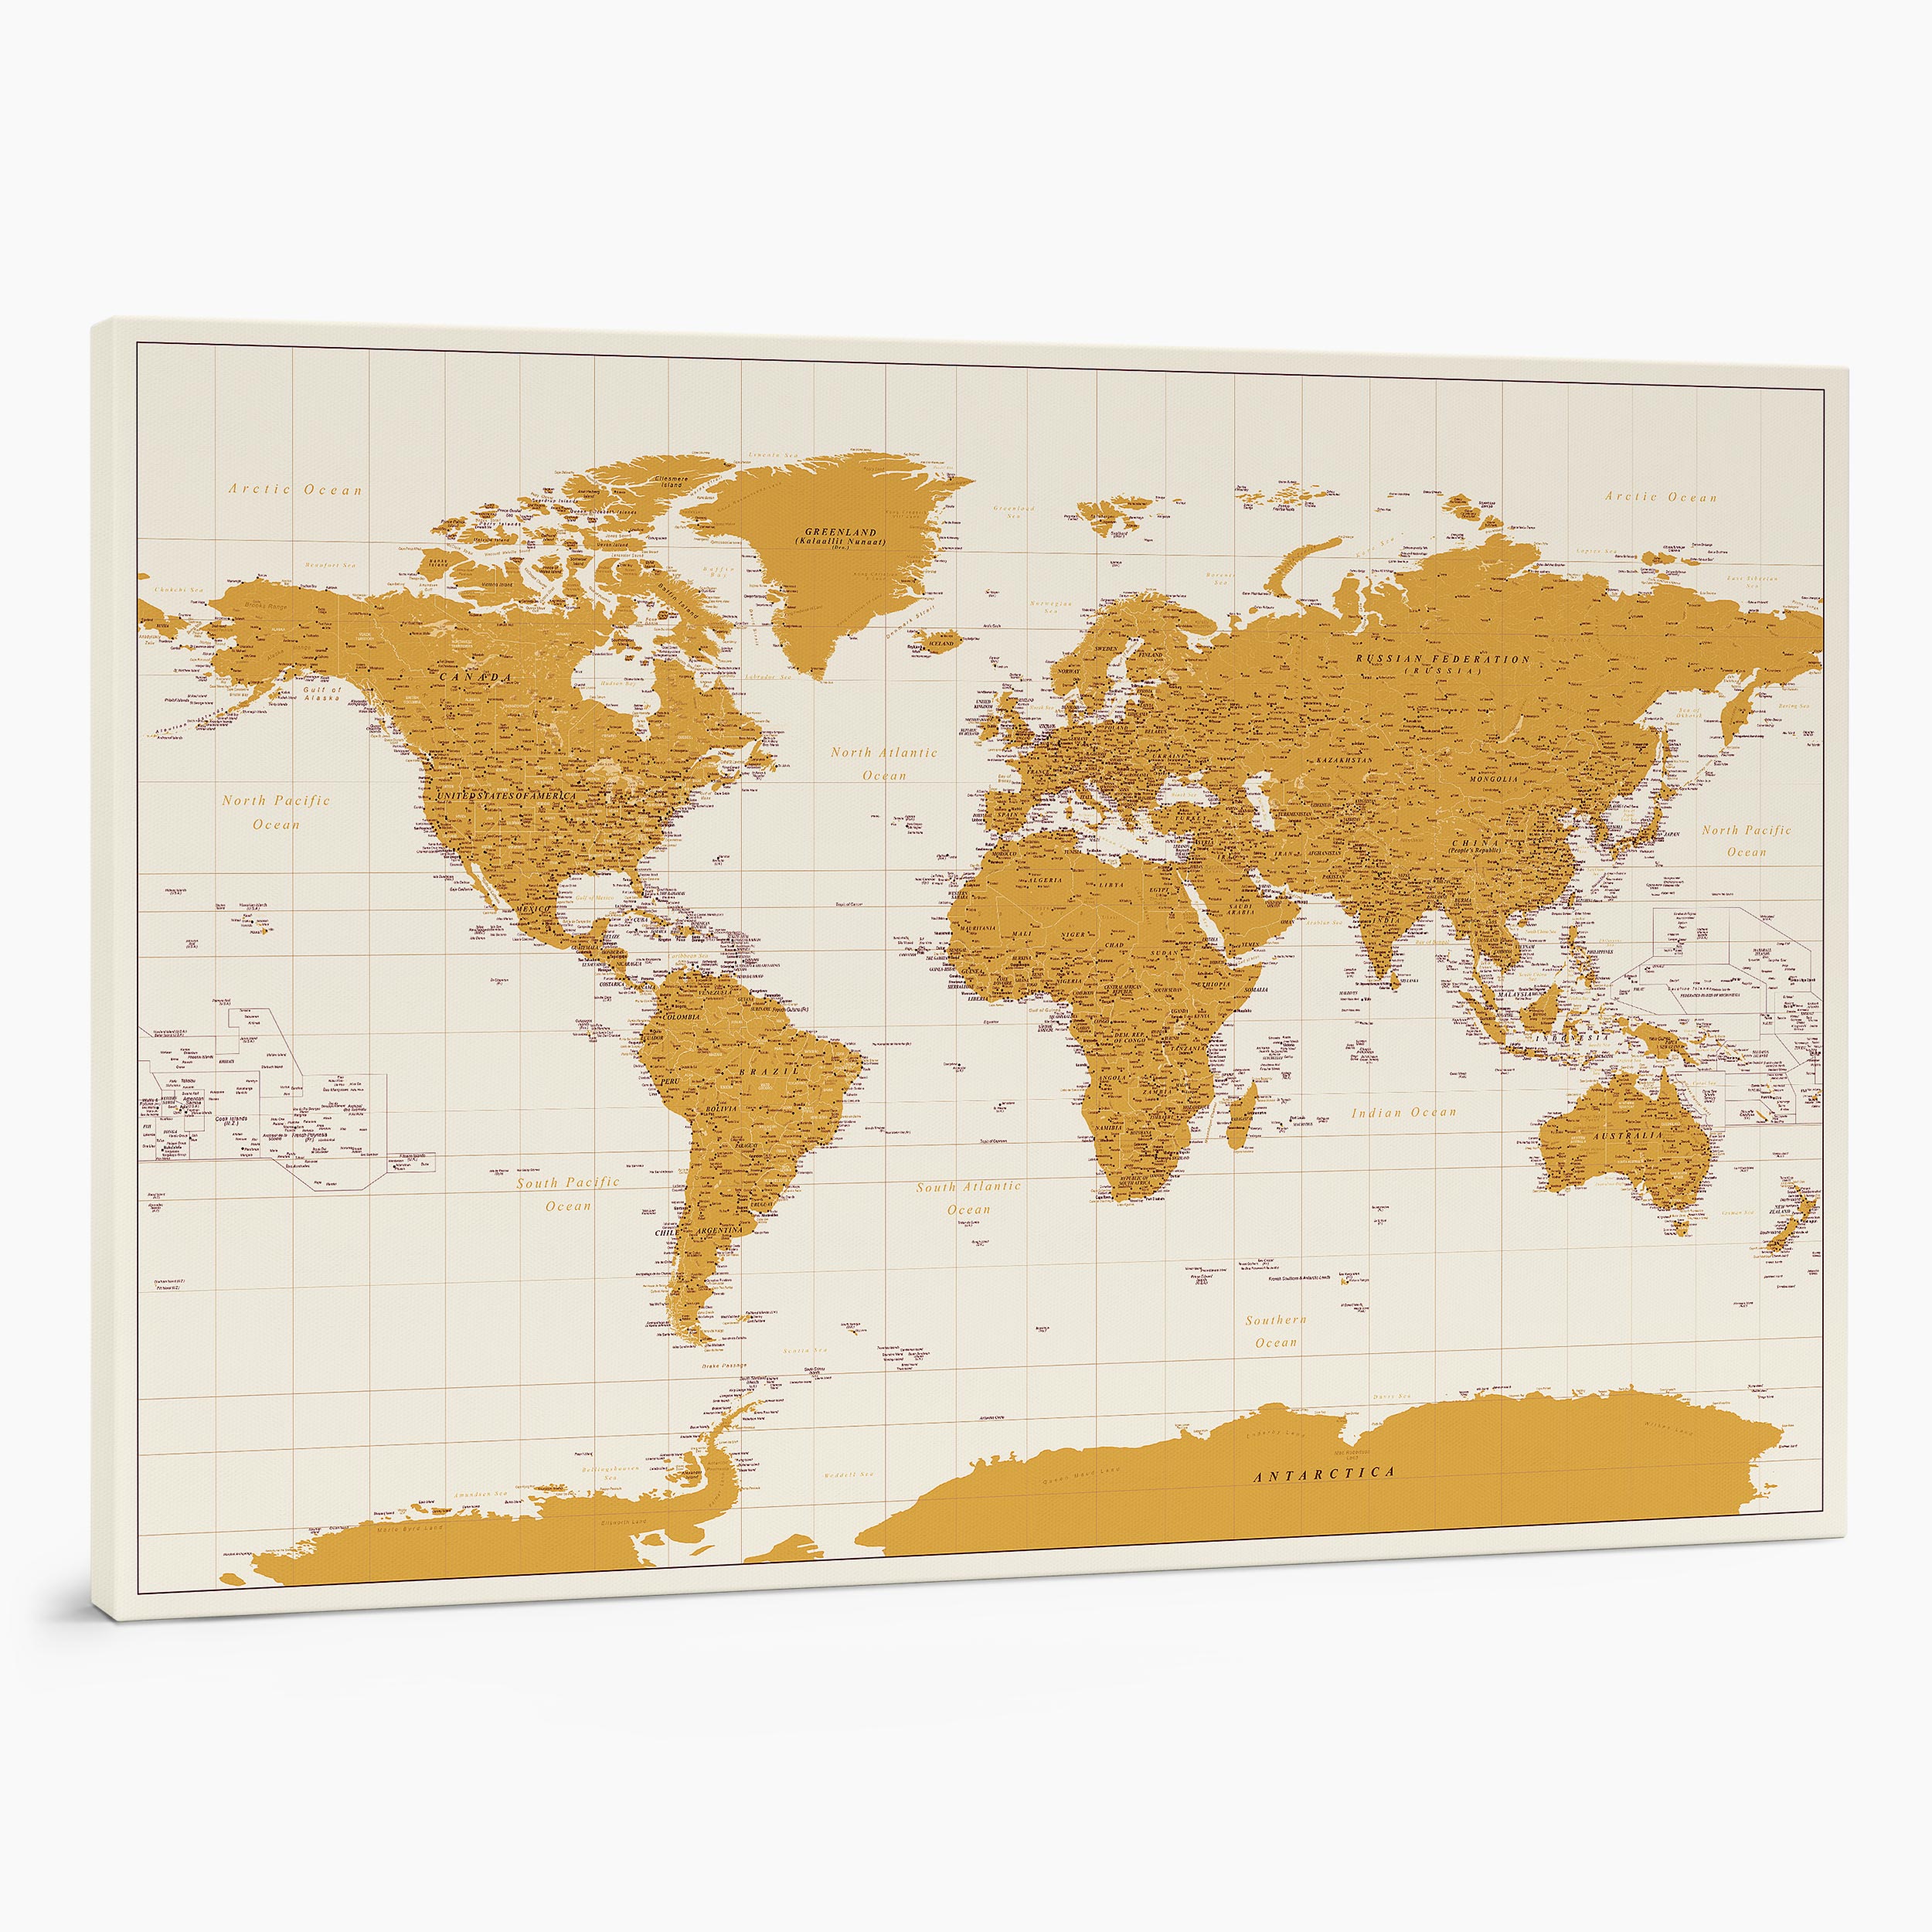 5P large push pin world map to track places visited on canvas yellow